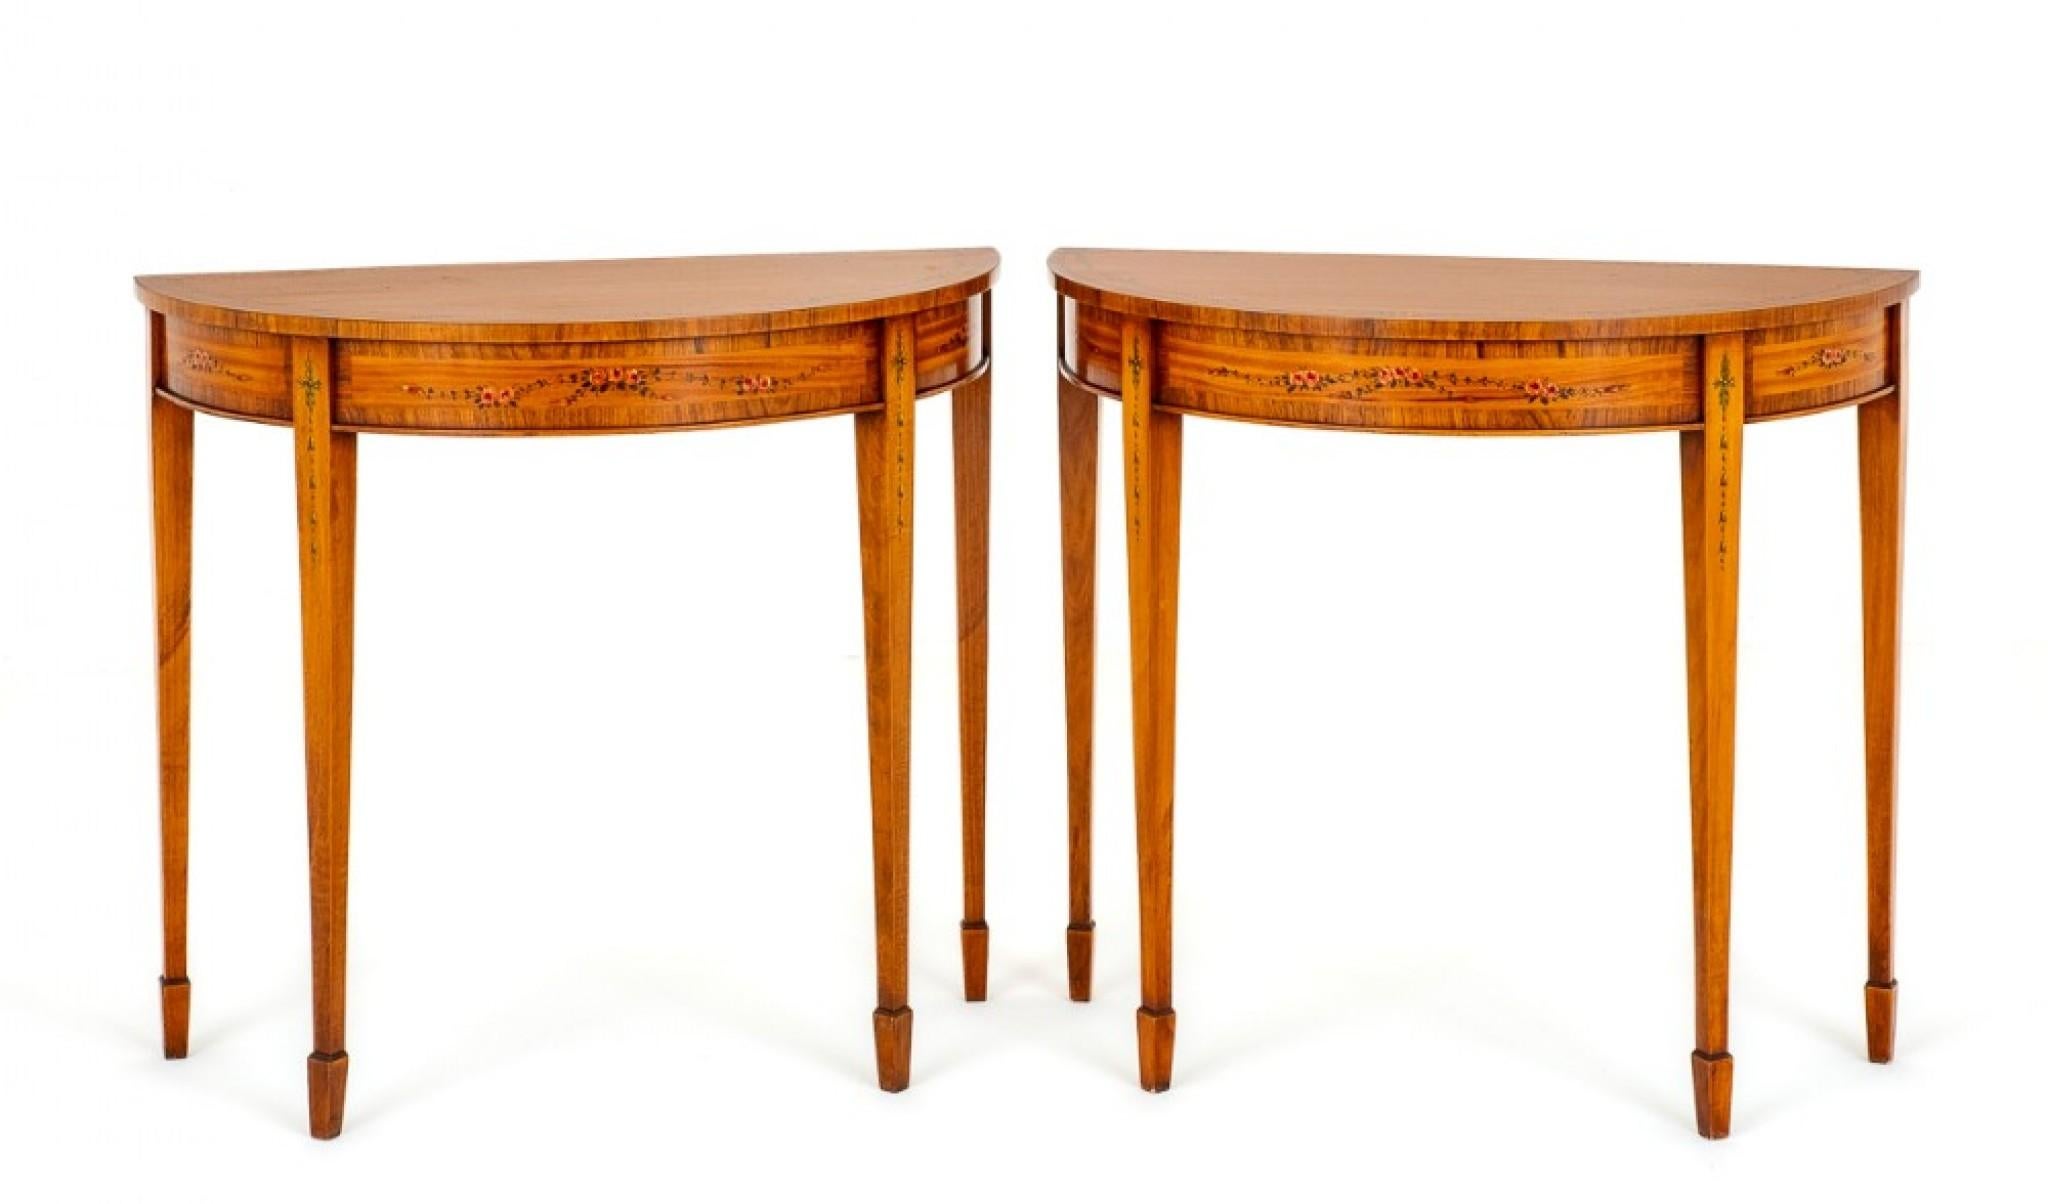 Pair of Satinwood Sheraton Revival Console Tables.
These Rather Elegant Console Tables are Raised upon Tapered Legs with Spade Feet.
Circa 1920
The Frieze and Tops of the Tables Featuring Rosewood Cross bandings.
The Whole of the Tables Having